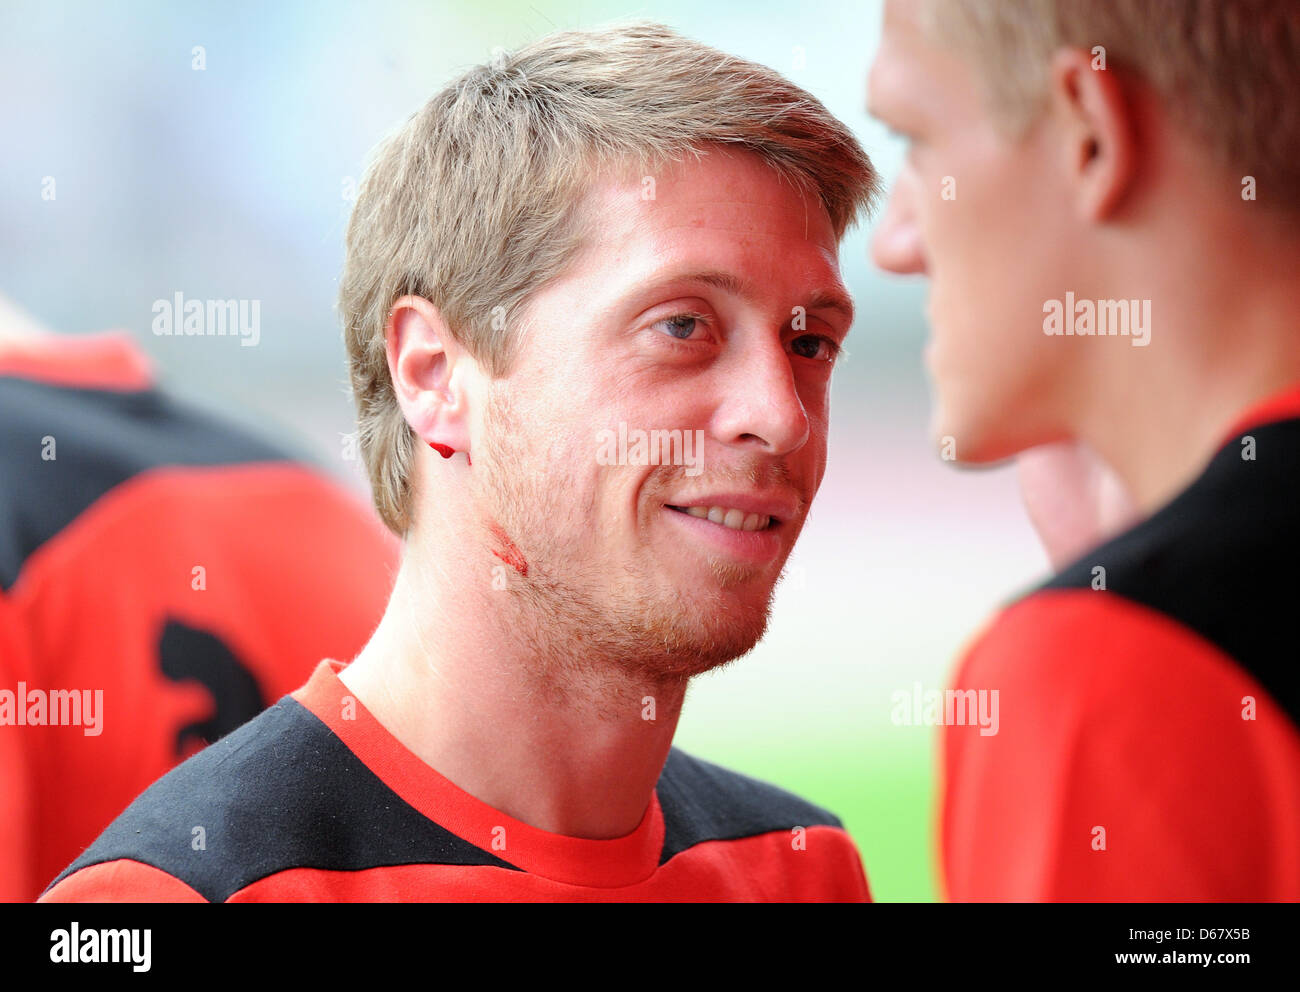 Duesseldorf's Andreas Lambertz bleeds after his lactate test during the start of training after the summer break on the practice field in Duesseldorf, Germany, 28 June 2012. Photo: CAROLINE SEIDEL Stock Photo